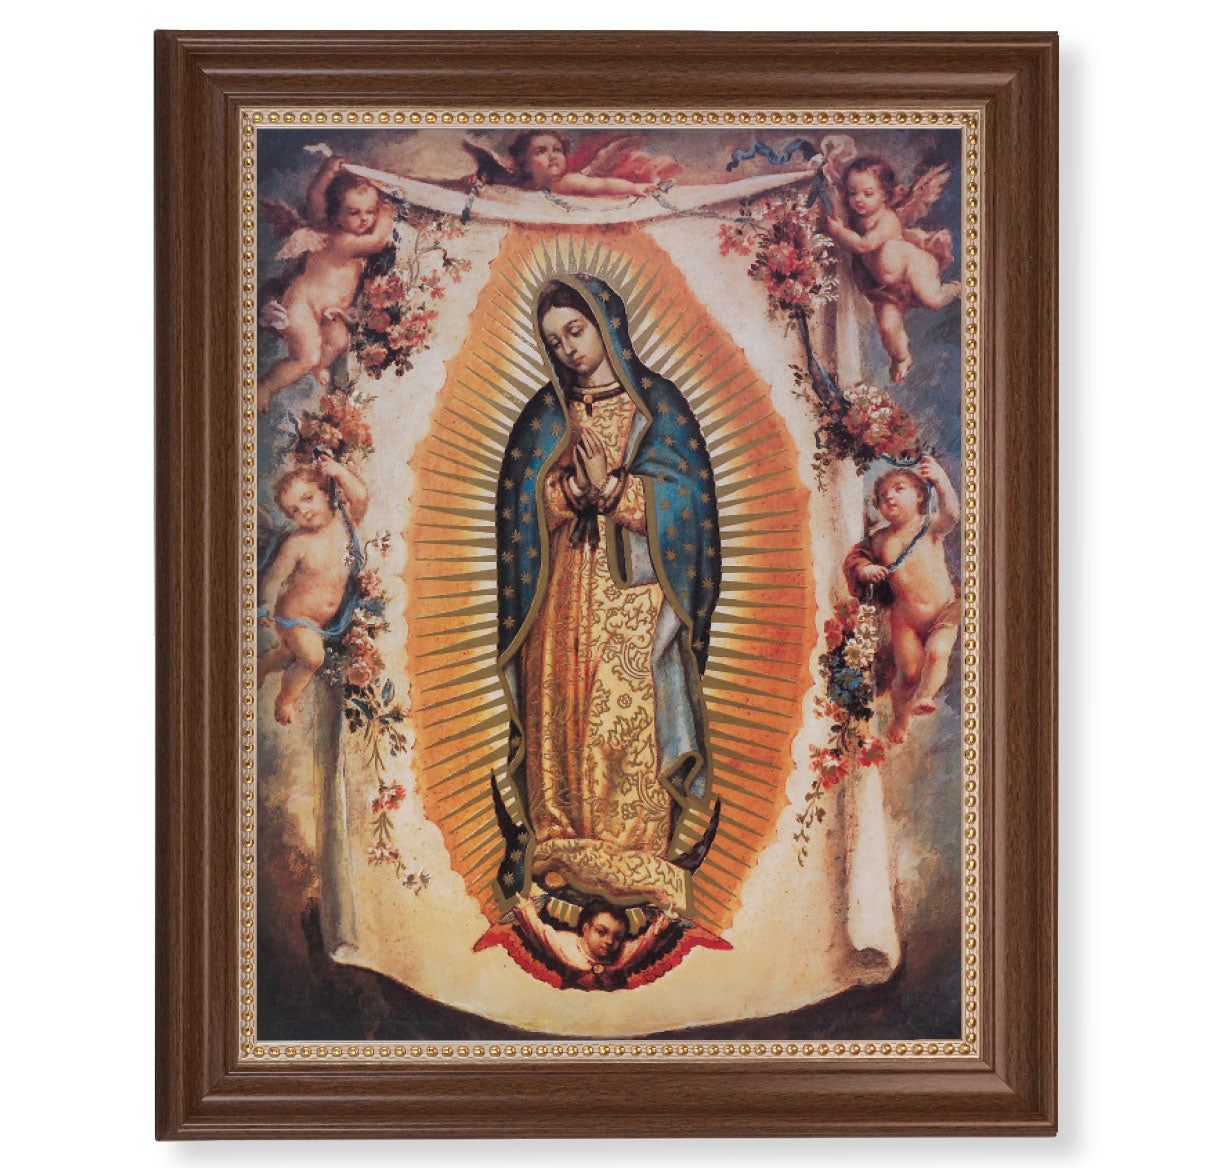 Our Lady of Guadalupe with Angels Picture Framed Wall Art Decor Extra Large, Classic Dark Walnut Finished Frame with Gold Beaded Lip